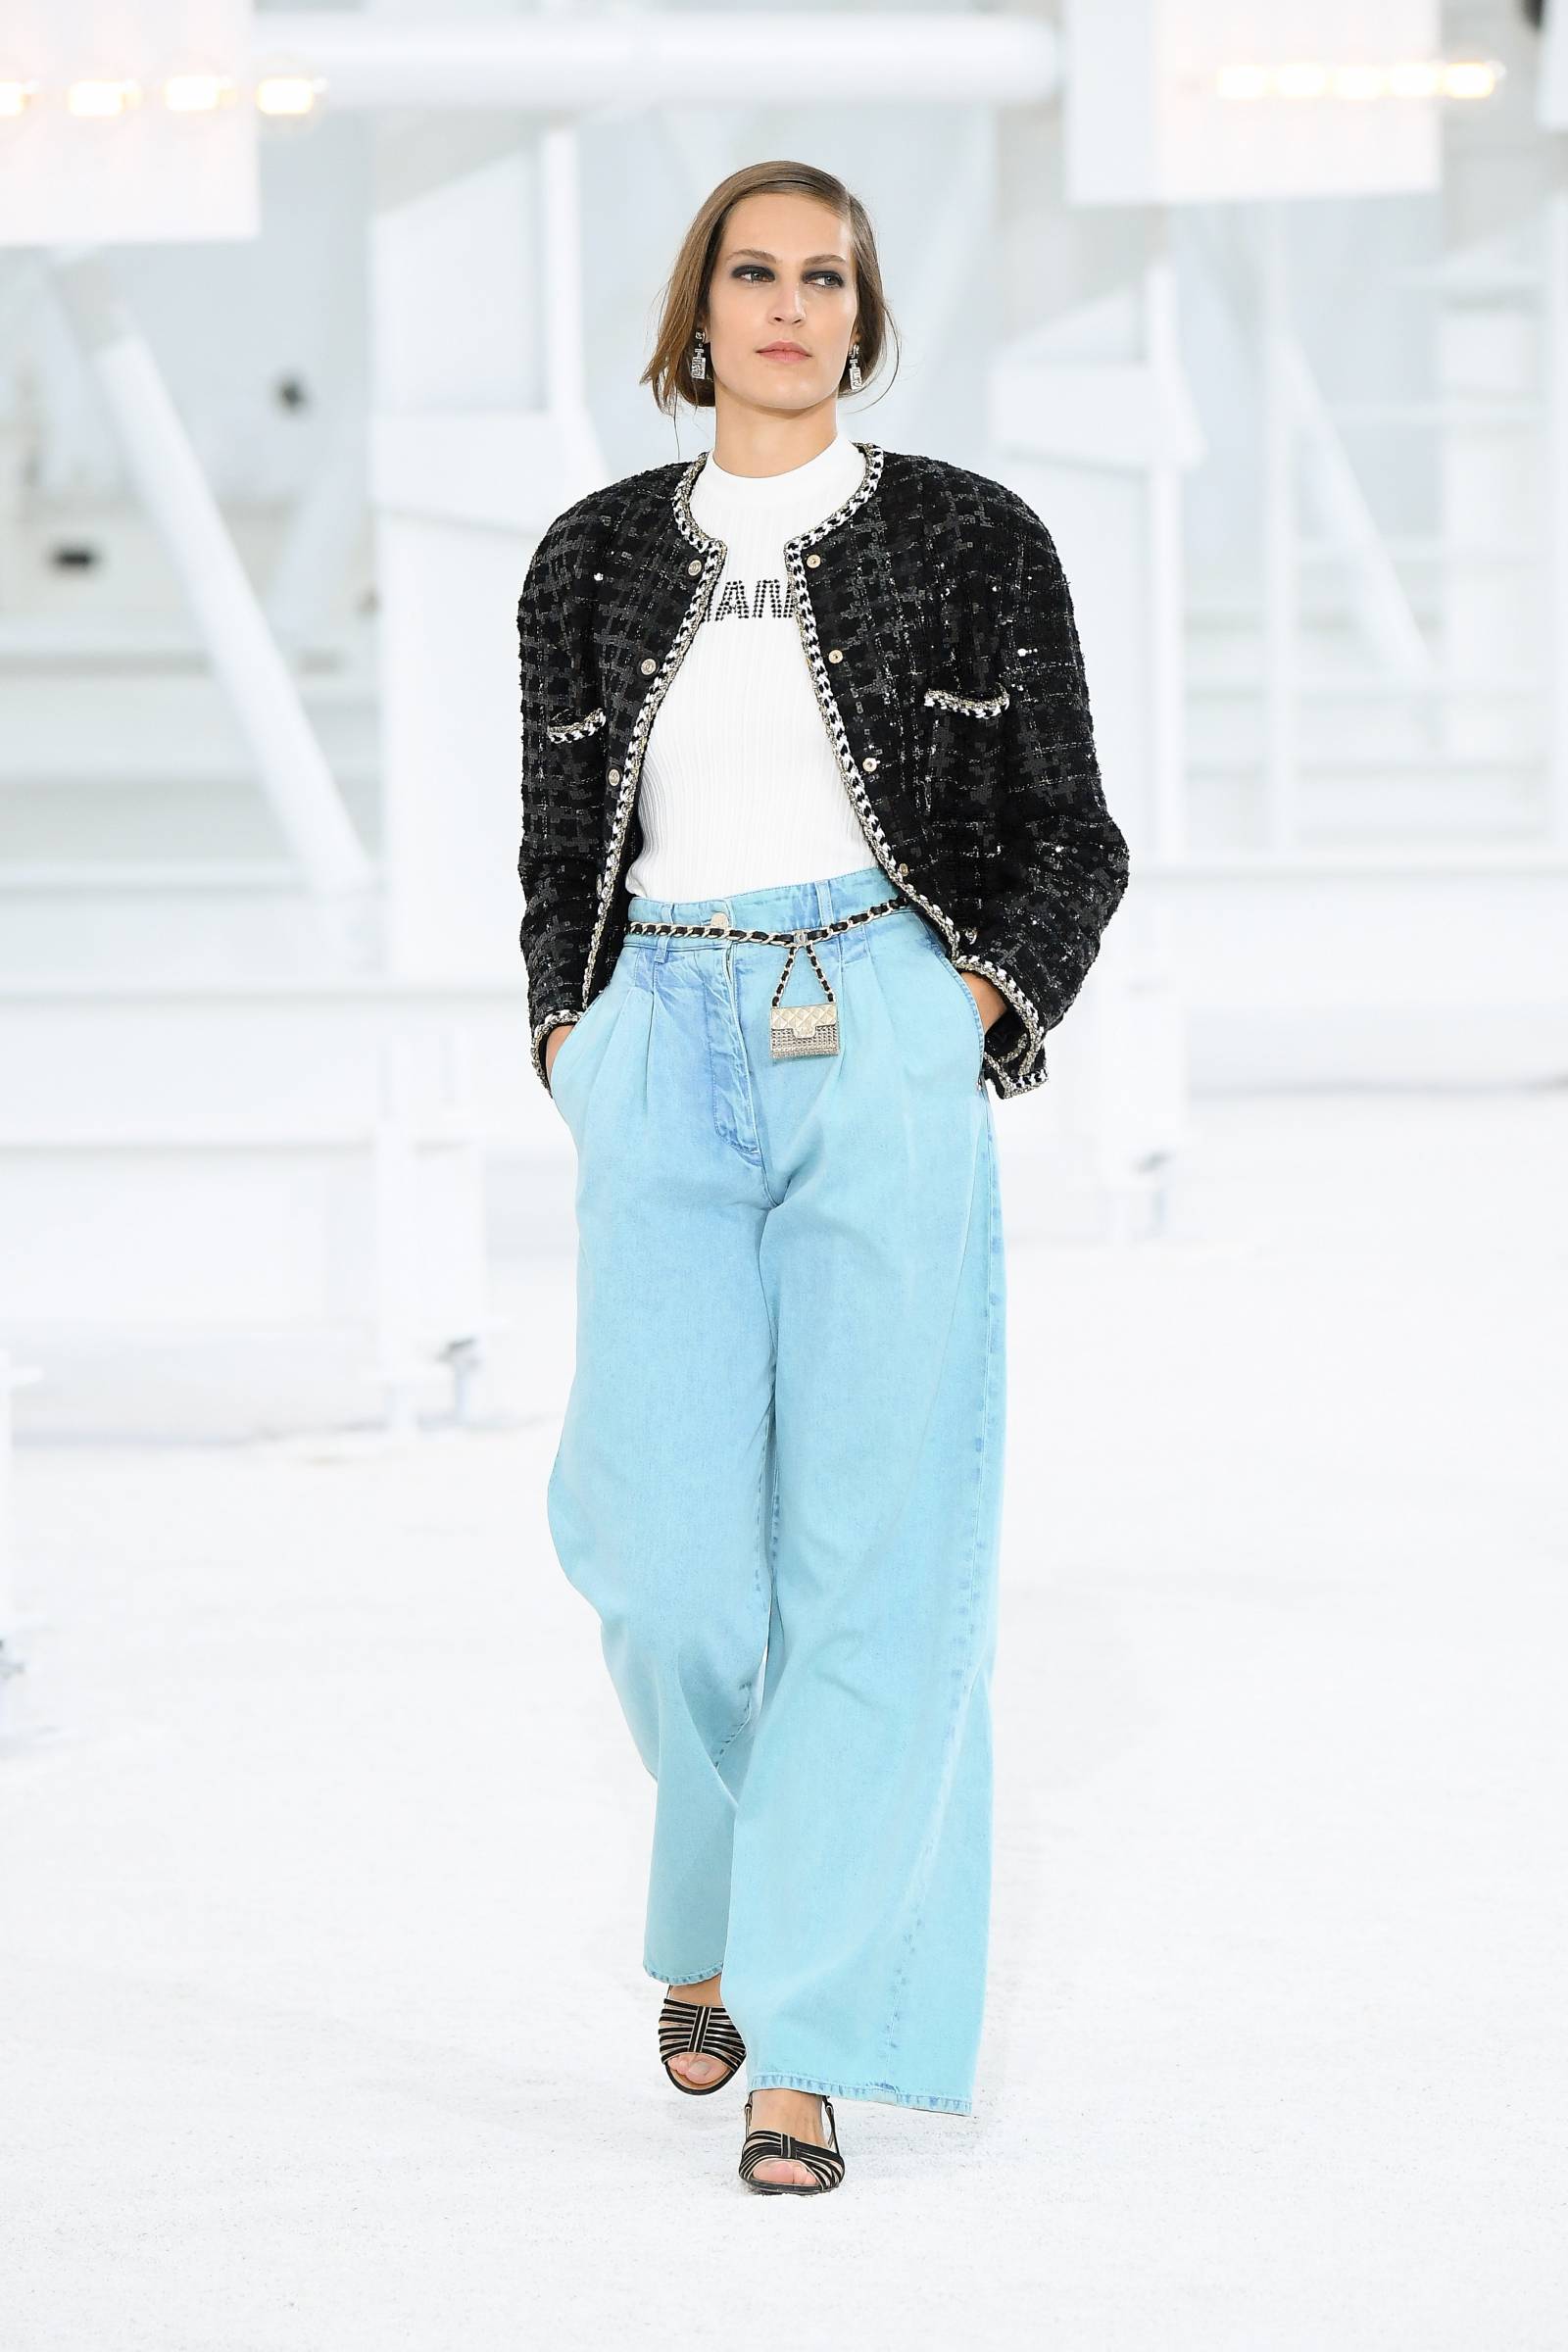 Chanel Spring 2021 Ready-to-Wear Collection | Cool Chic Style Fashion